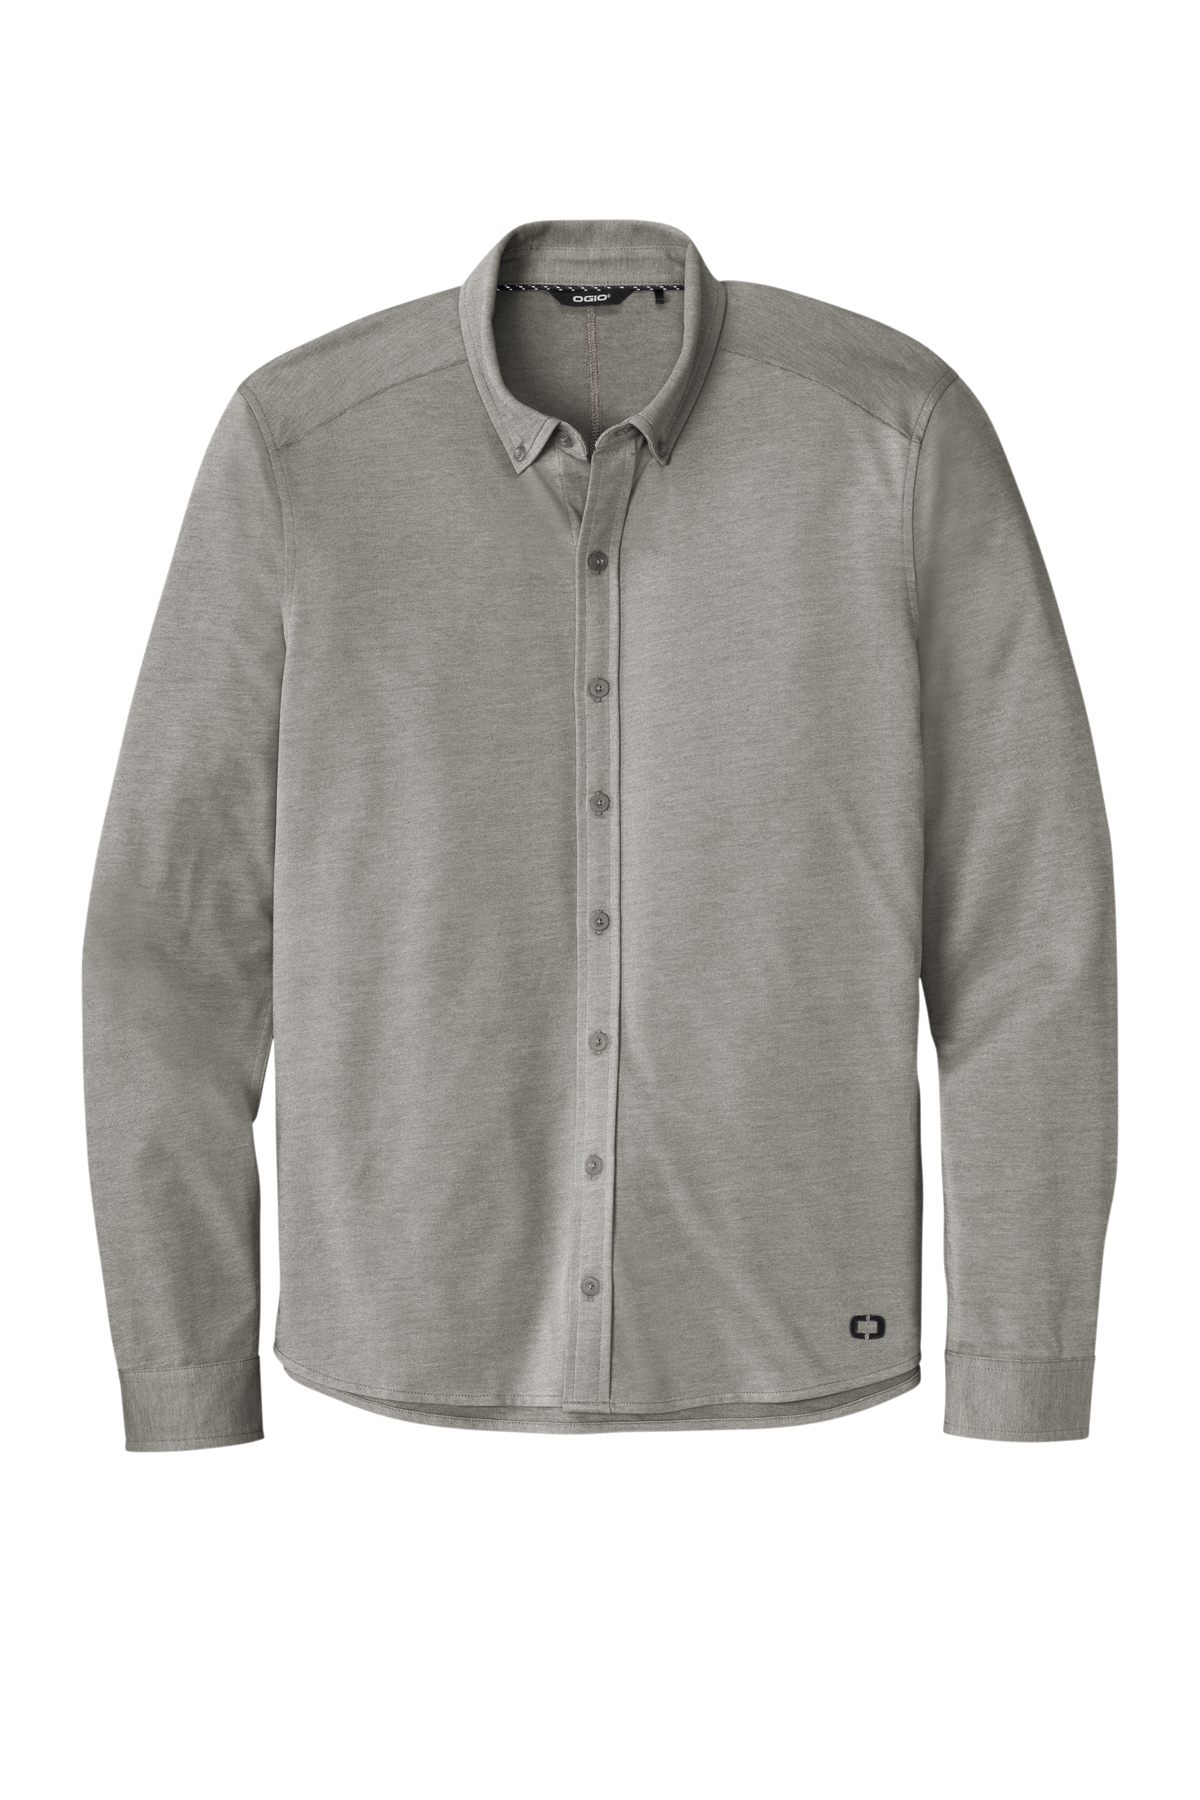 OGIO Code Stretch Long Sleeve Button-Up | Product | Online Apparel Market